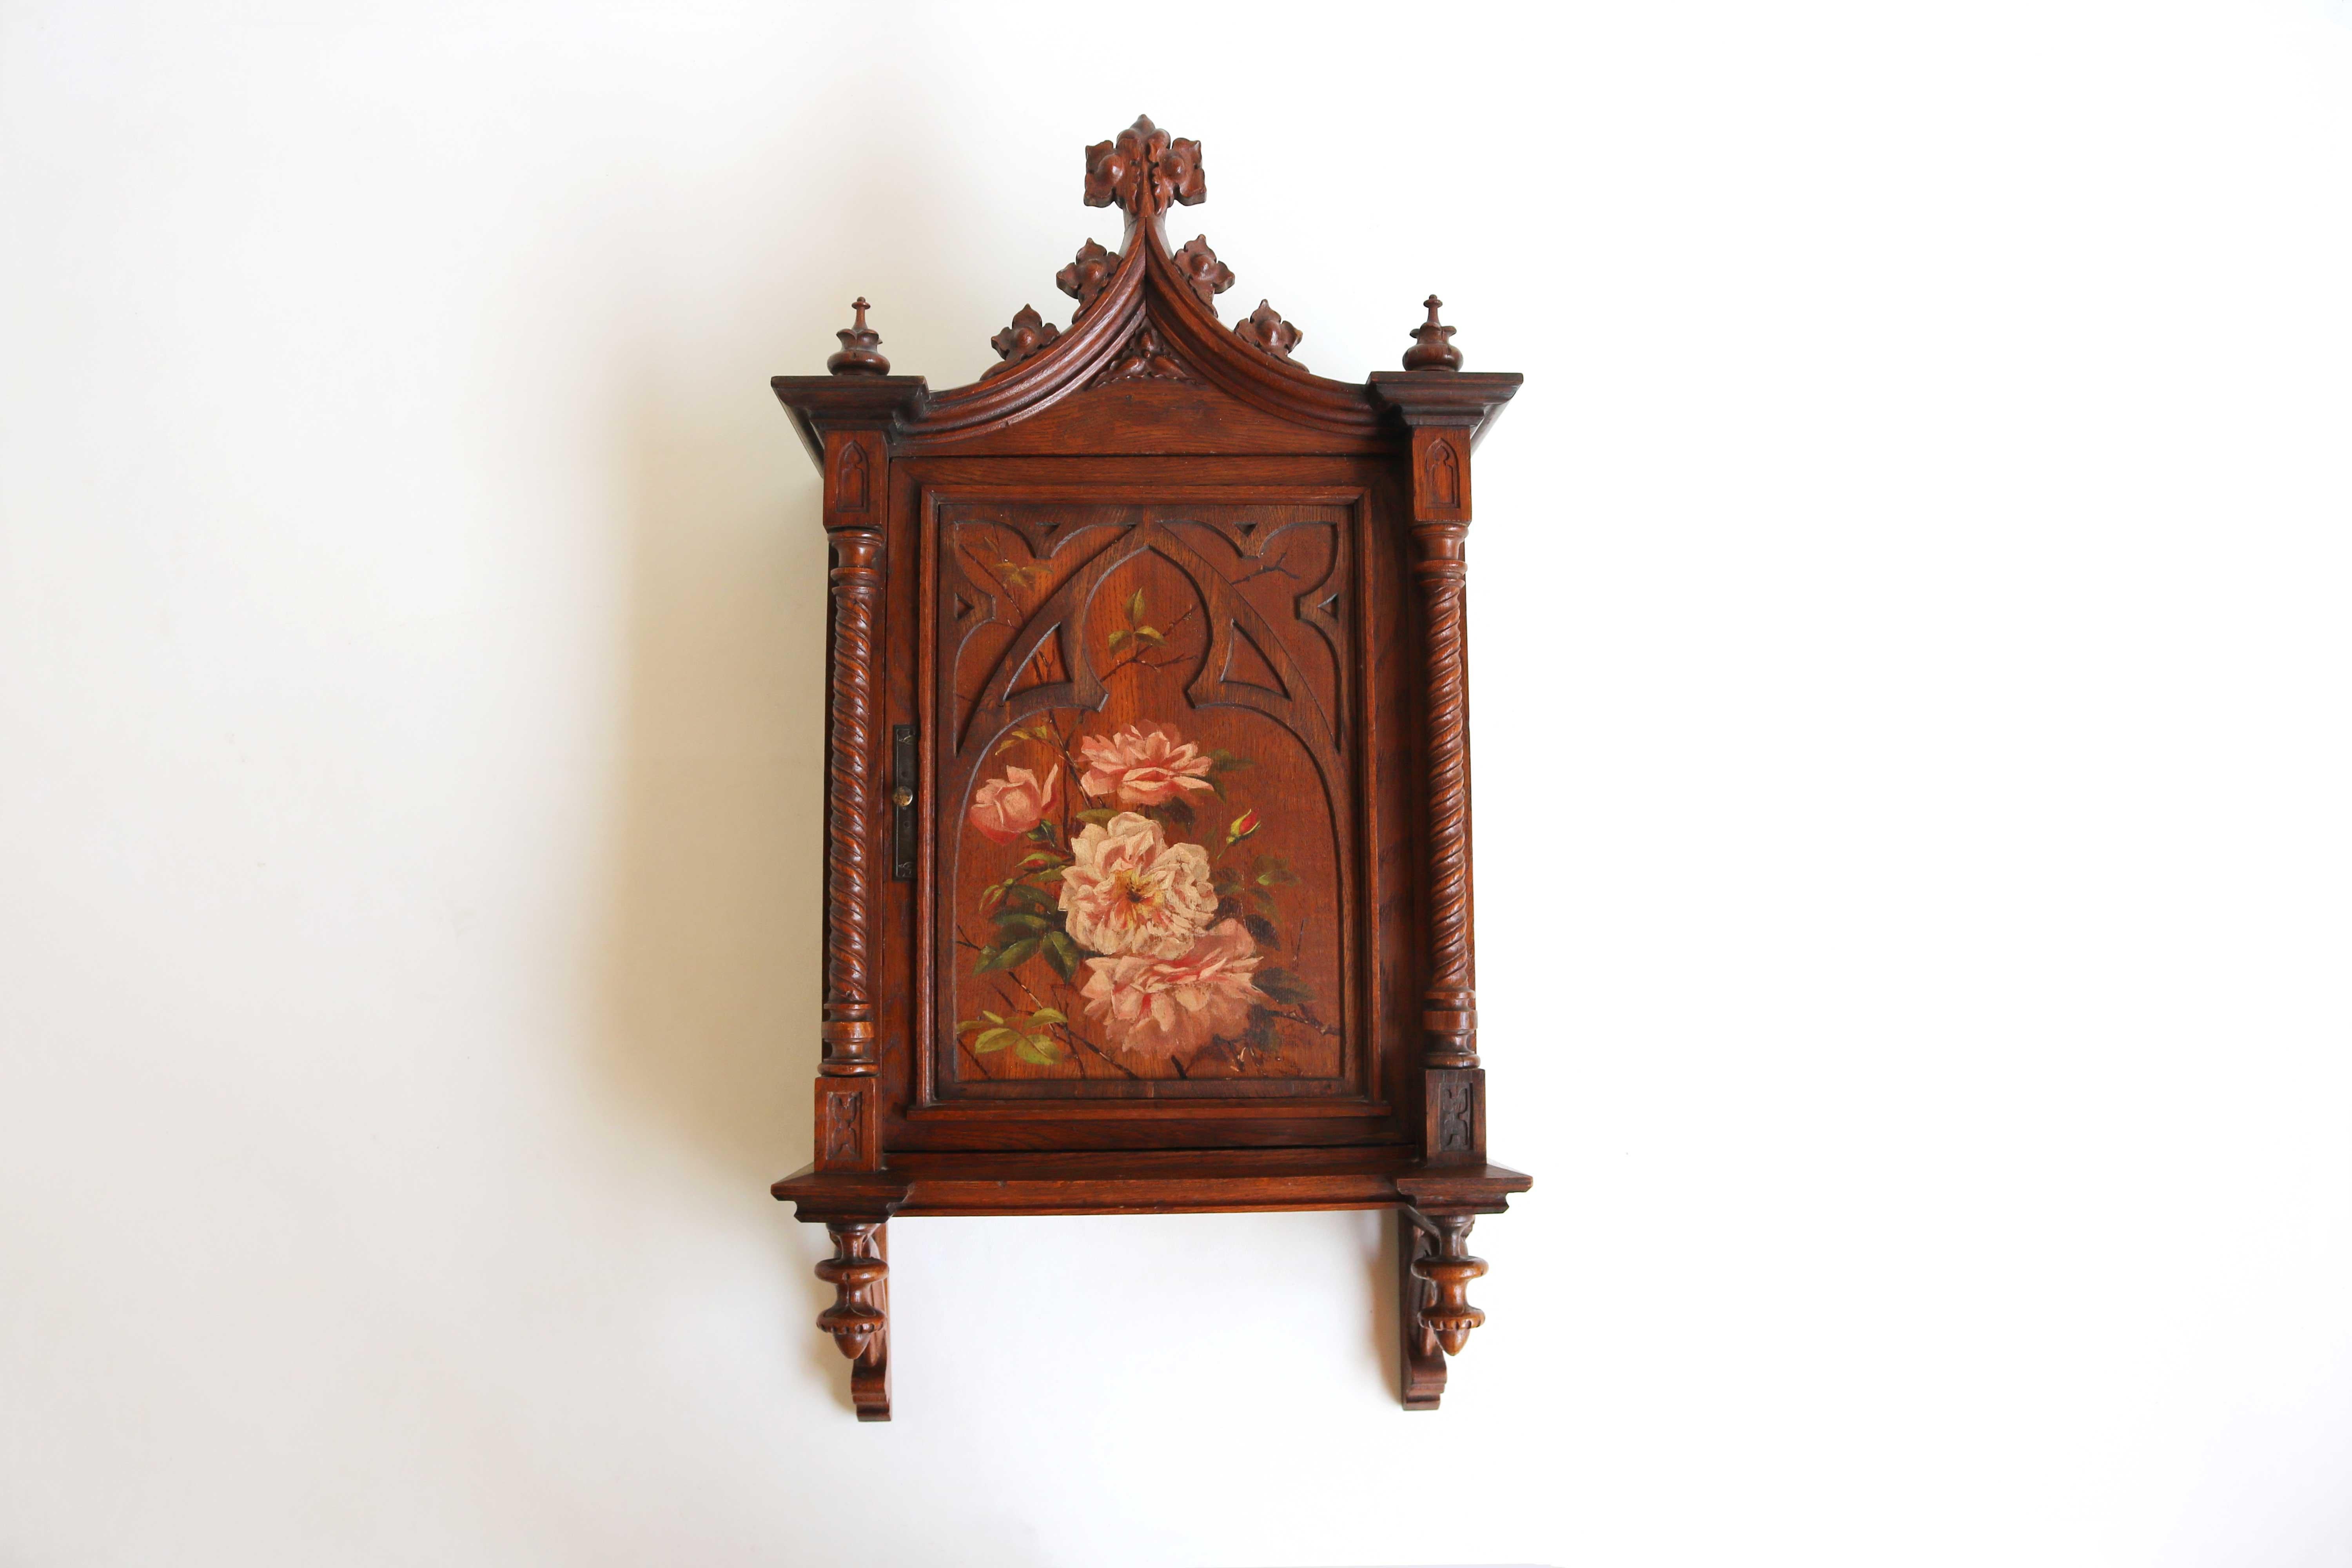 Antique Wooden Carved Hand Painted Neo-Gothic Small Wall Cabinet France 19th Century Pediment Twisted Medicine Cabinet Gothic Revival

Truly a beautiful rare and stunning antique hanging cabinet. 
Late antique 19th-century French gothic style